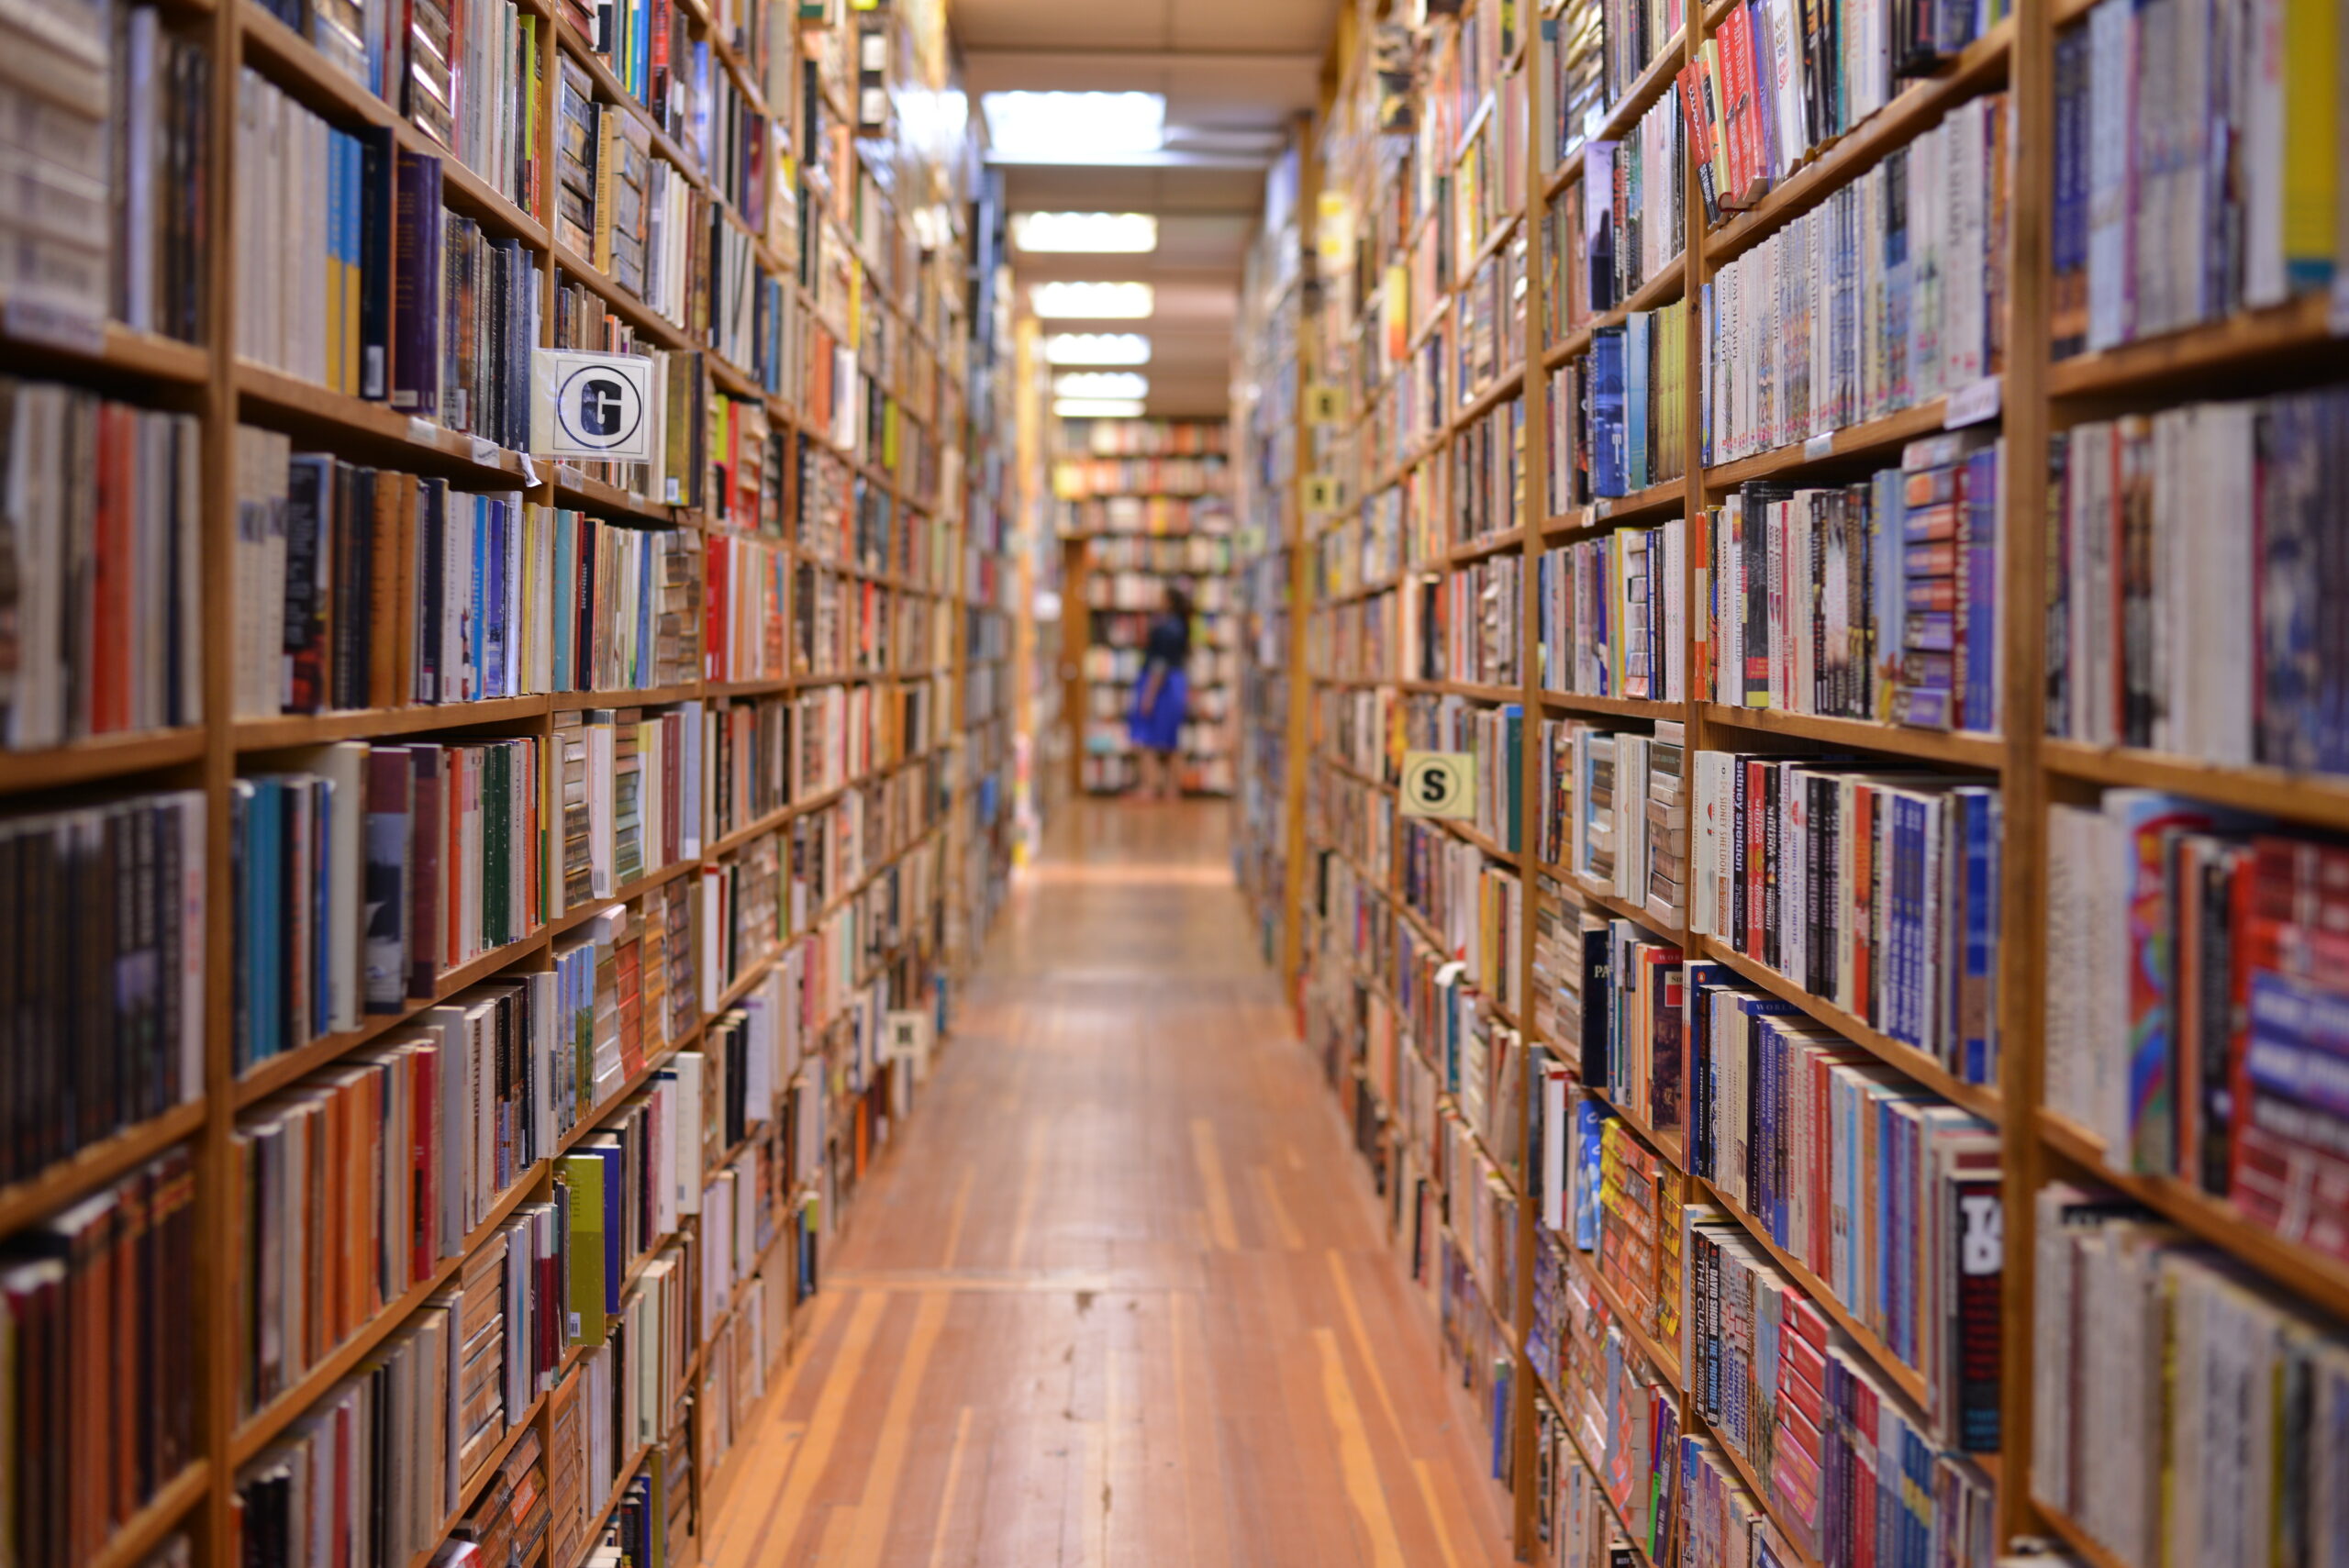 aisle between brightly colored bookshelves